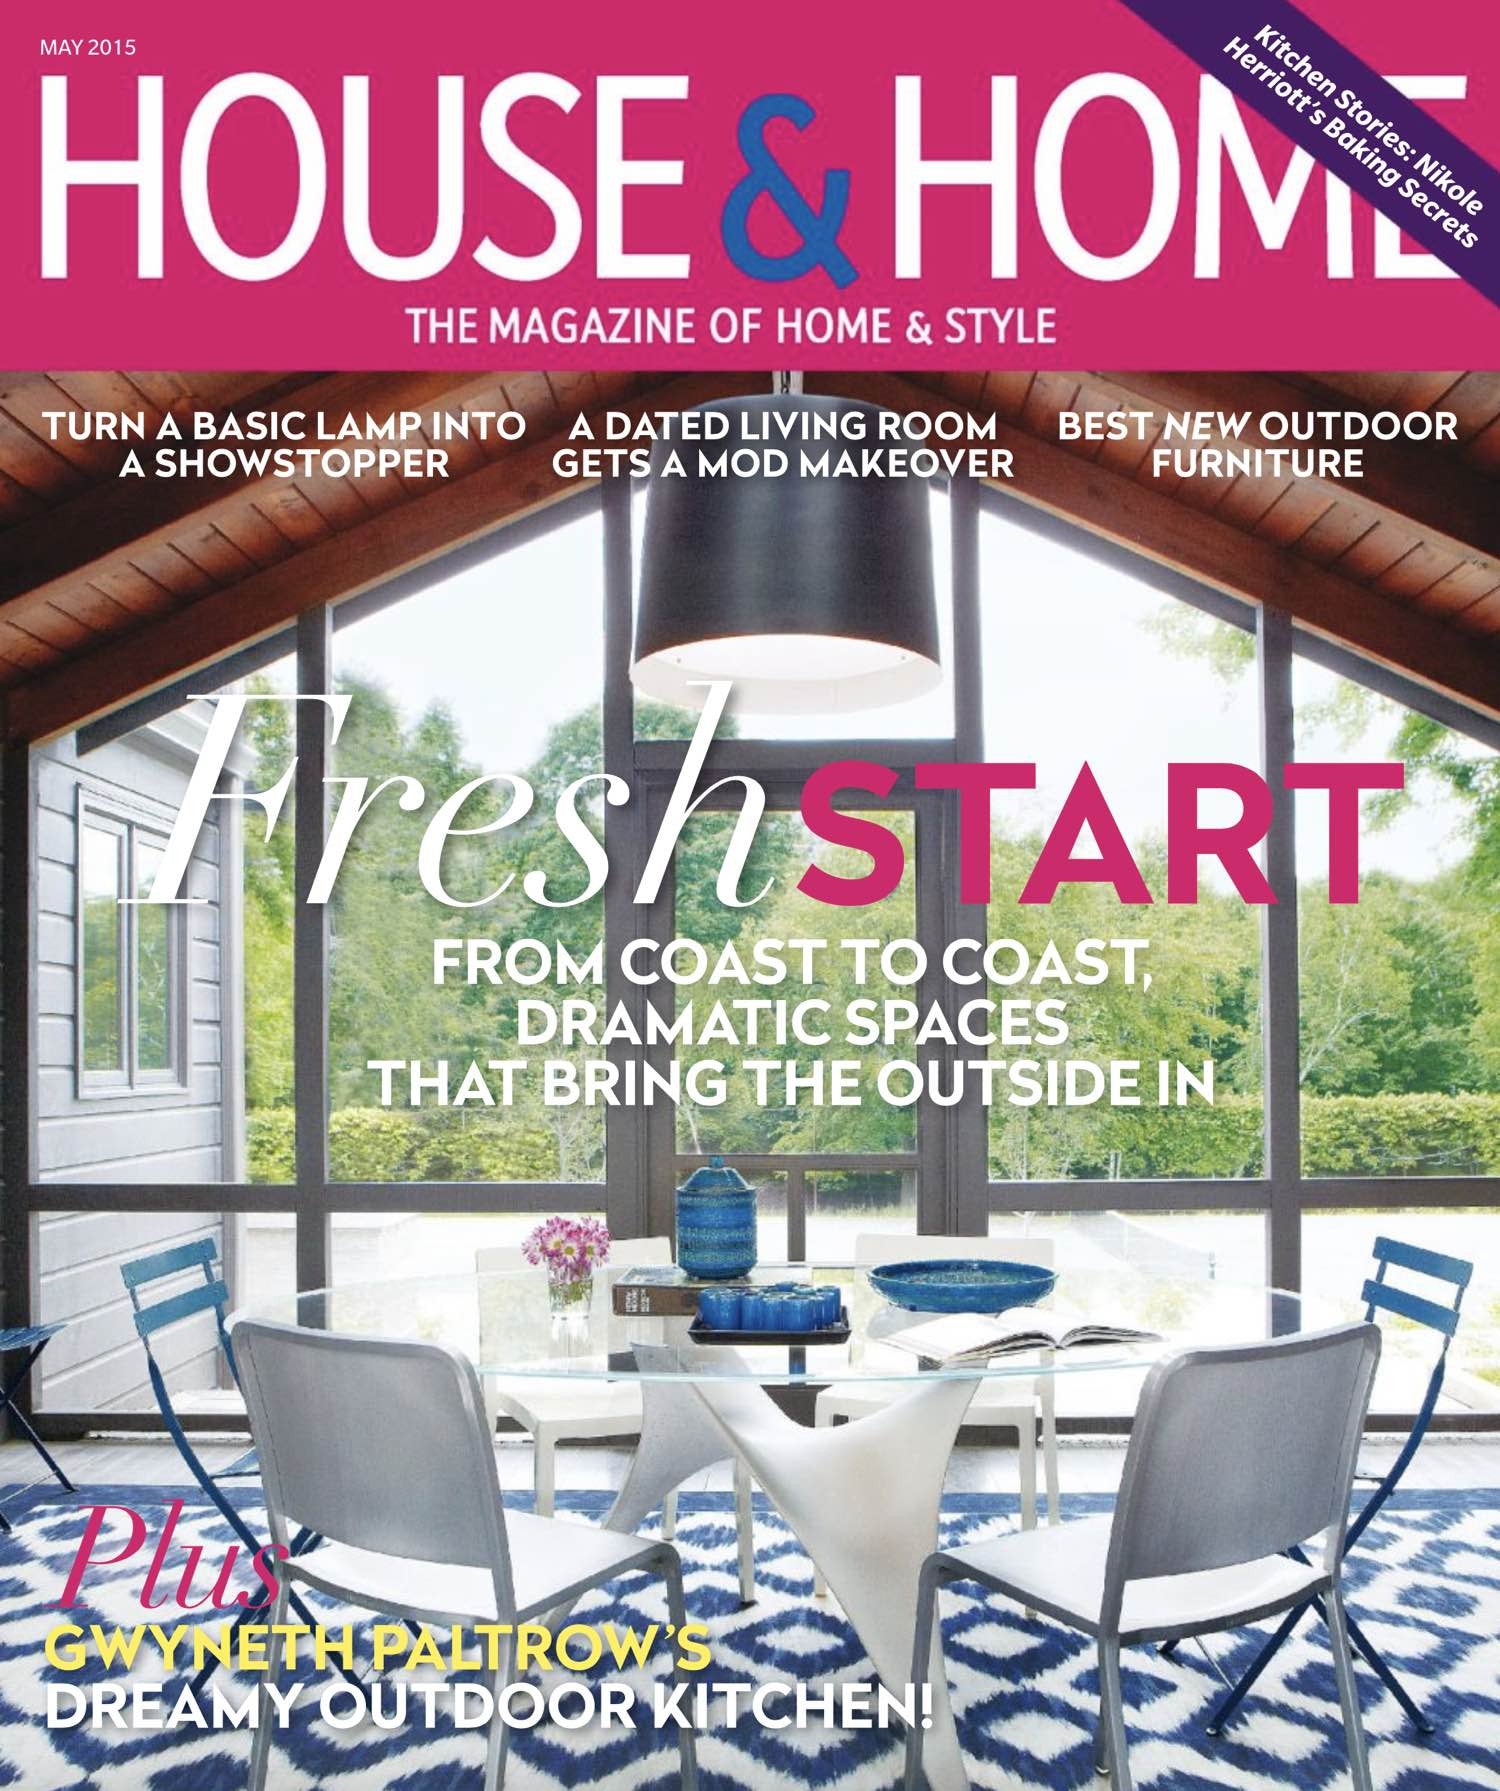 House & Home: May 2015